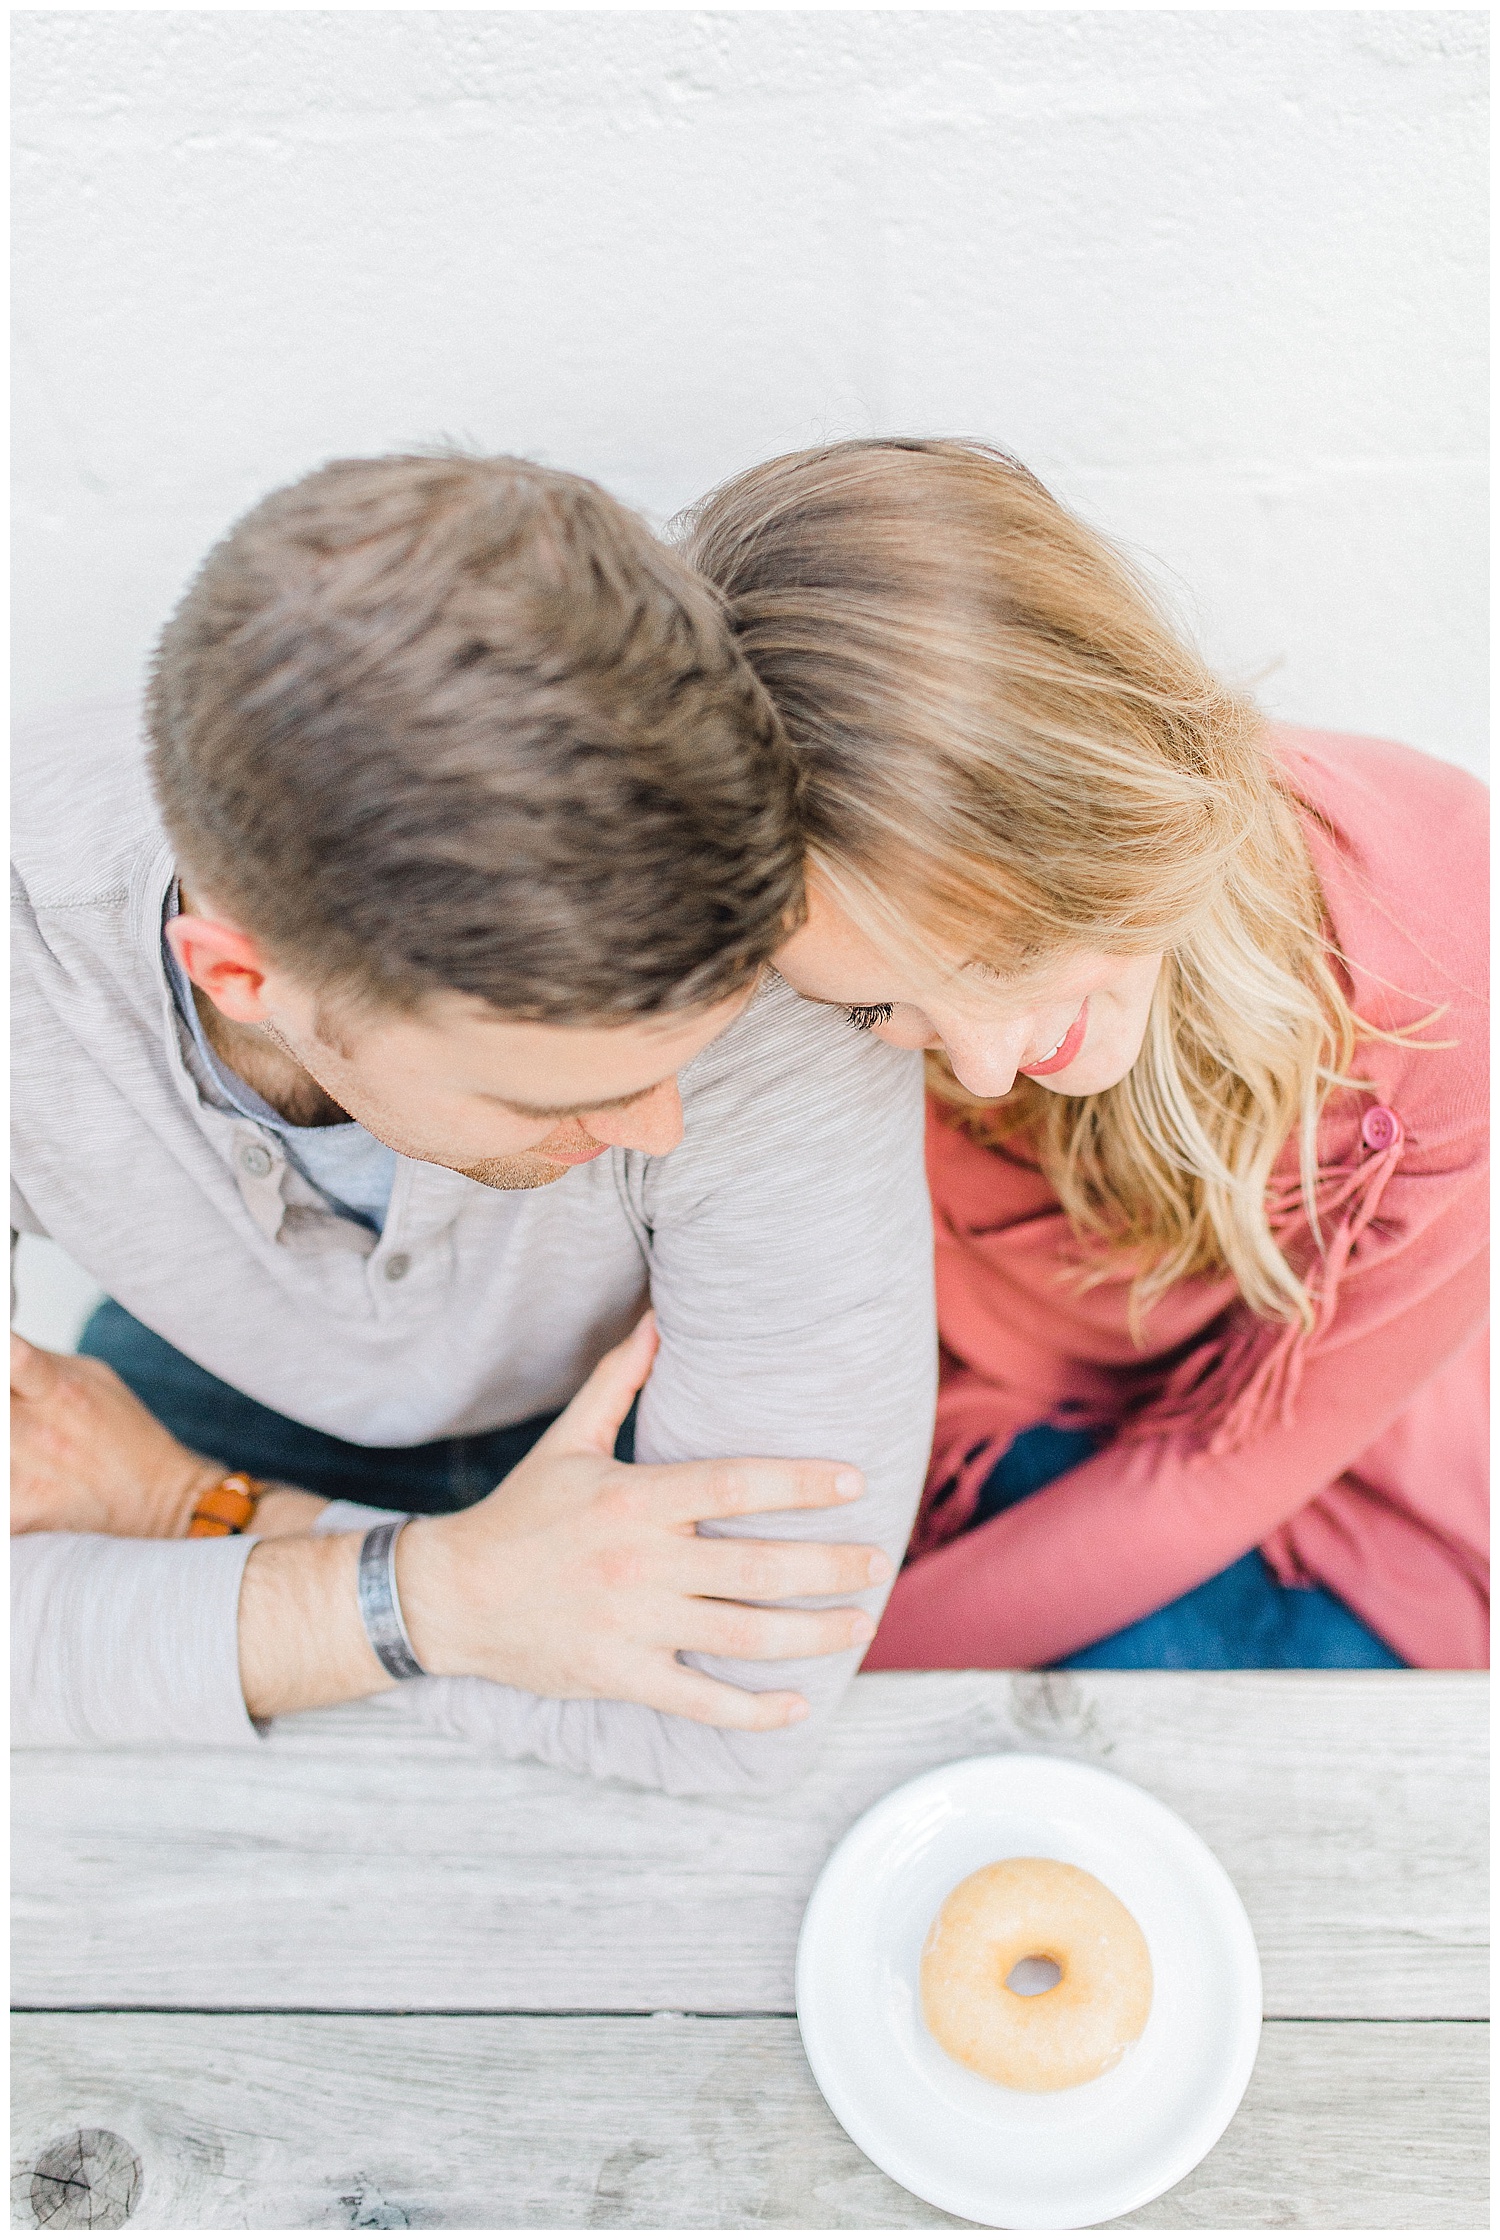 ERC_0821_Downtown Nashville Engagement Session at Barista Parlor | Emma Rose Company Wedding Photographer | Outfit Inspiration for Engagement Session | Kindred Light and Airy Photographer.jpg